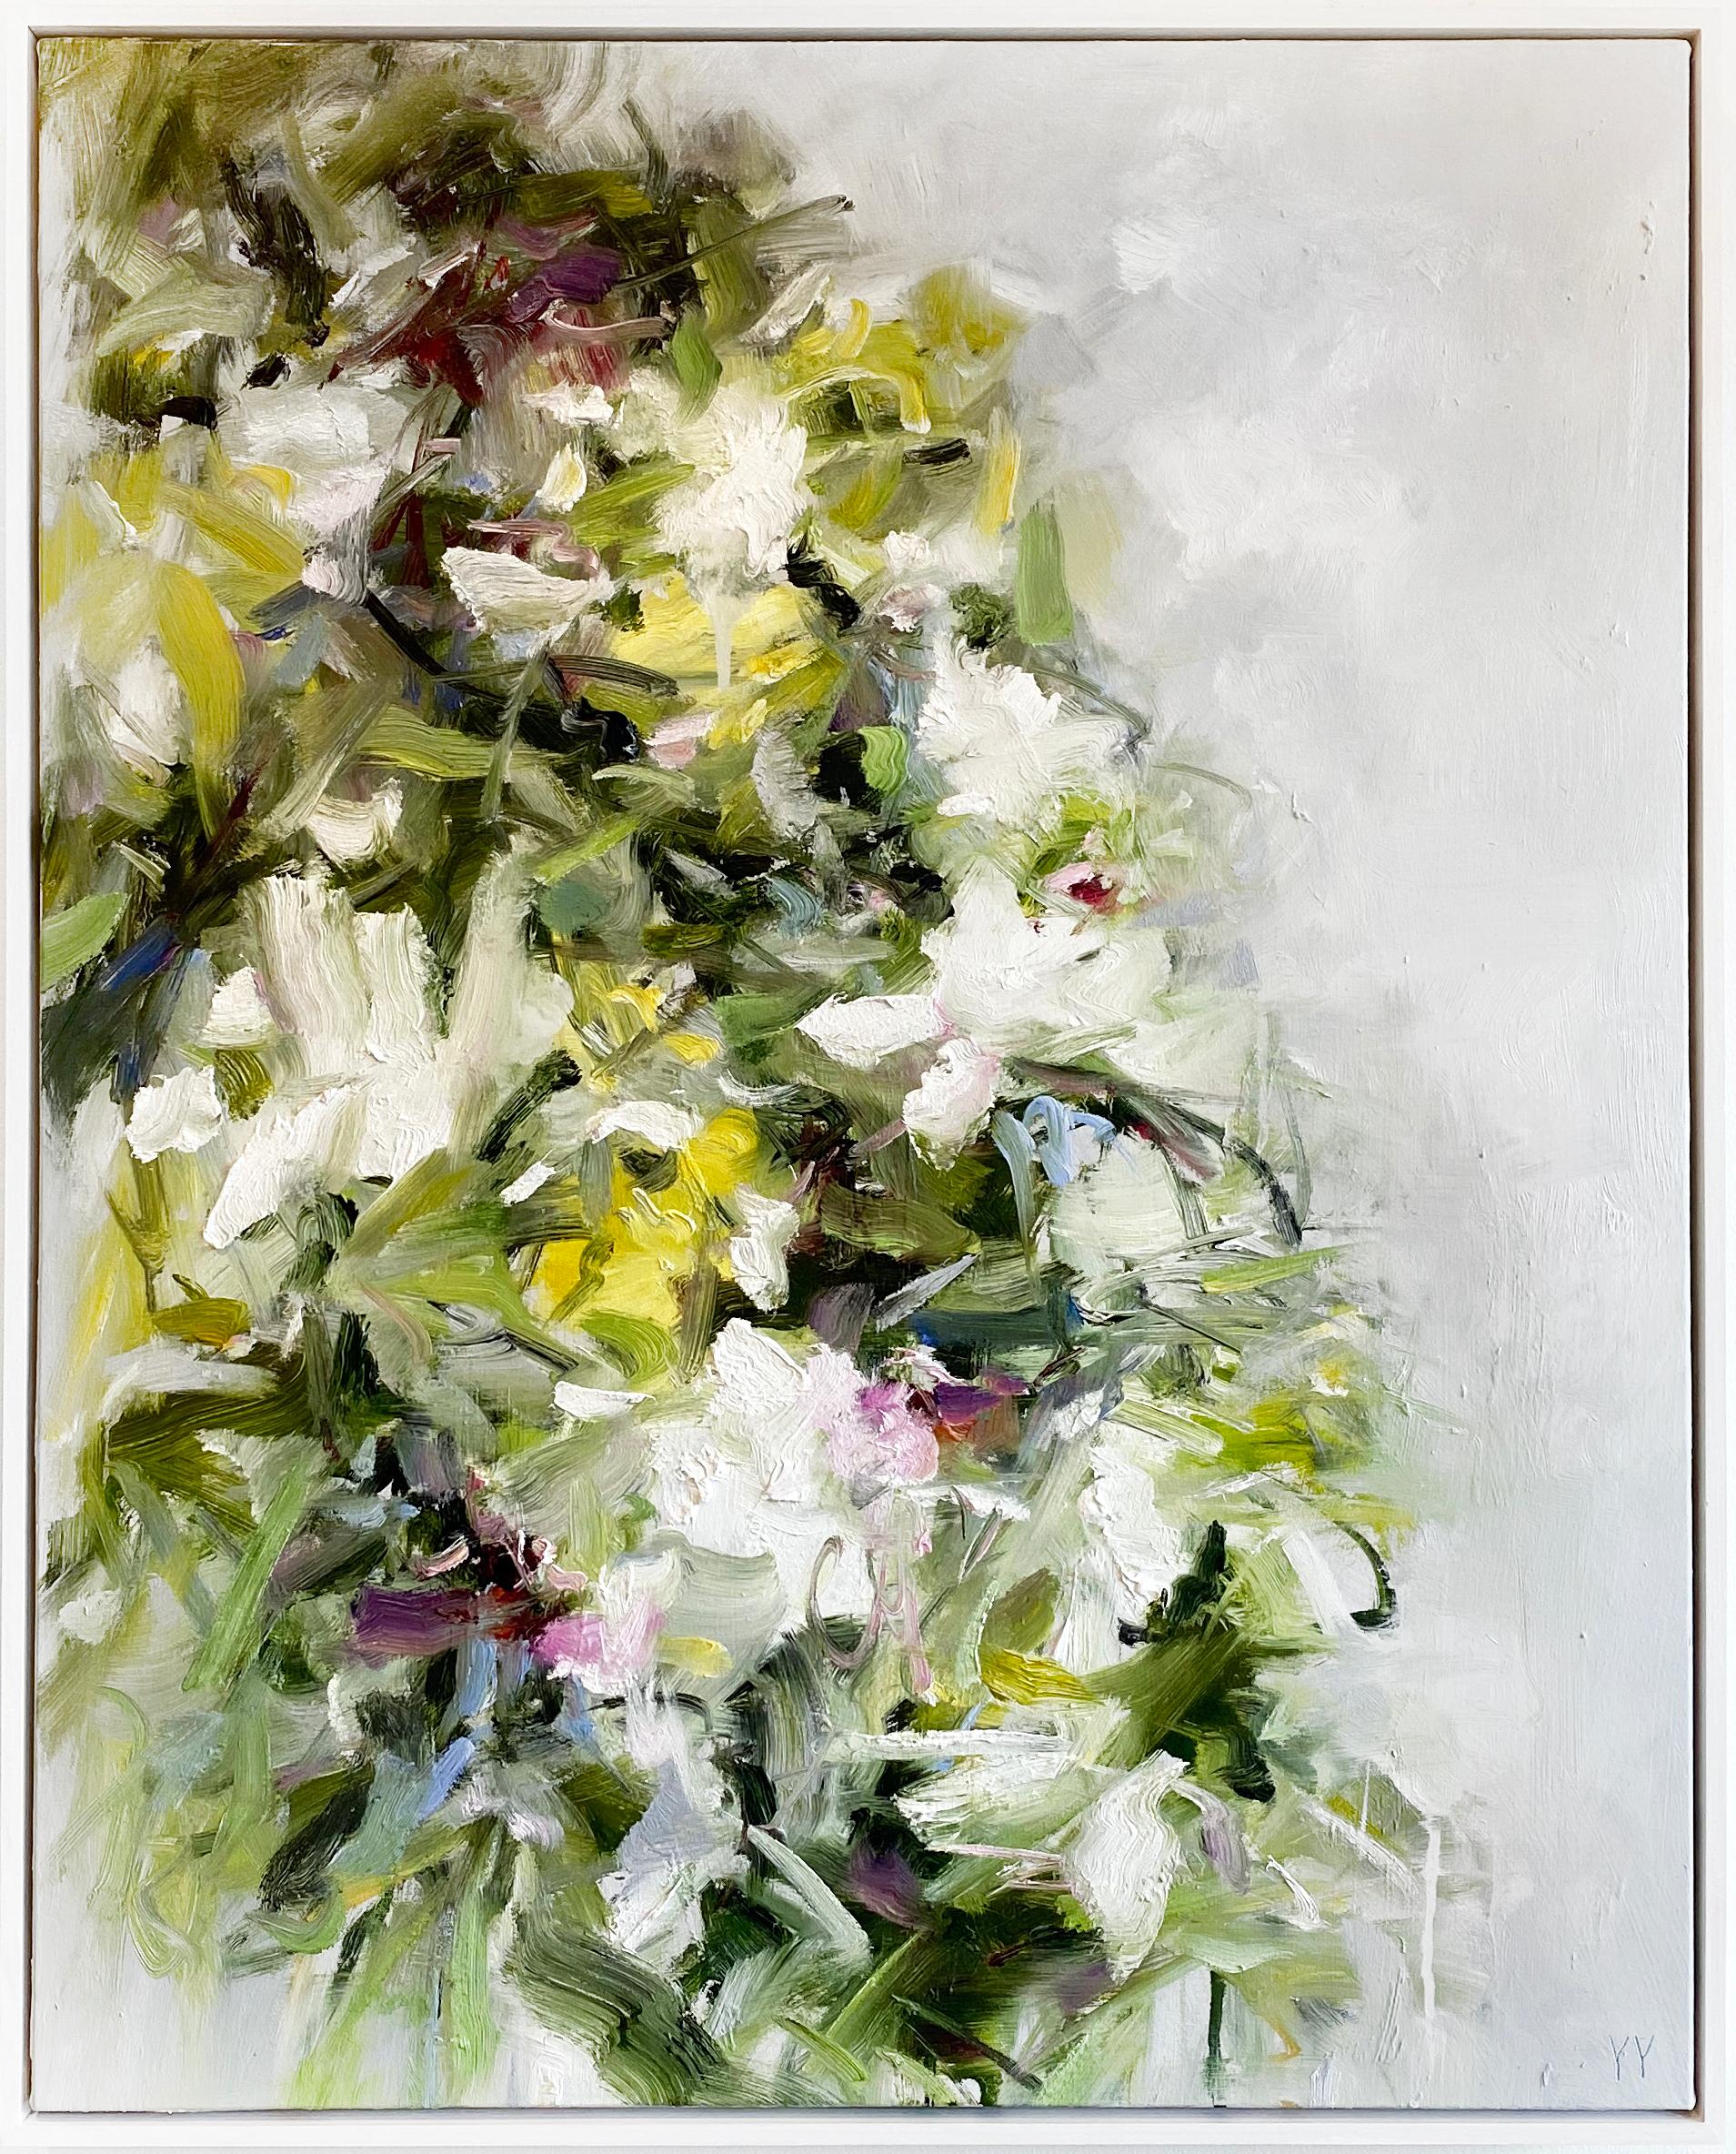 'Branch Bloom' 2022 by Chinese/Canadian artist Yangyang Pan. Oil on canvas, 30 x 24 in. This beautiful abstract-expressionistic, landscape painting incorporates gestural brushstrokes in bold colors of  green, yellow, white, grey, and pink. It is